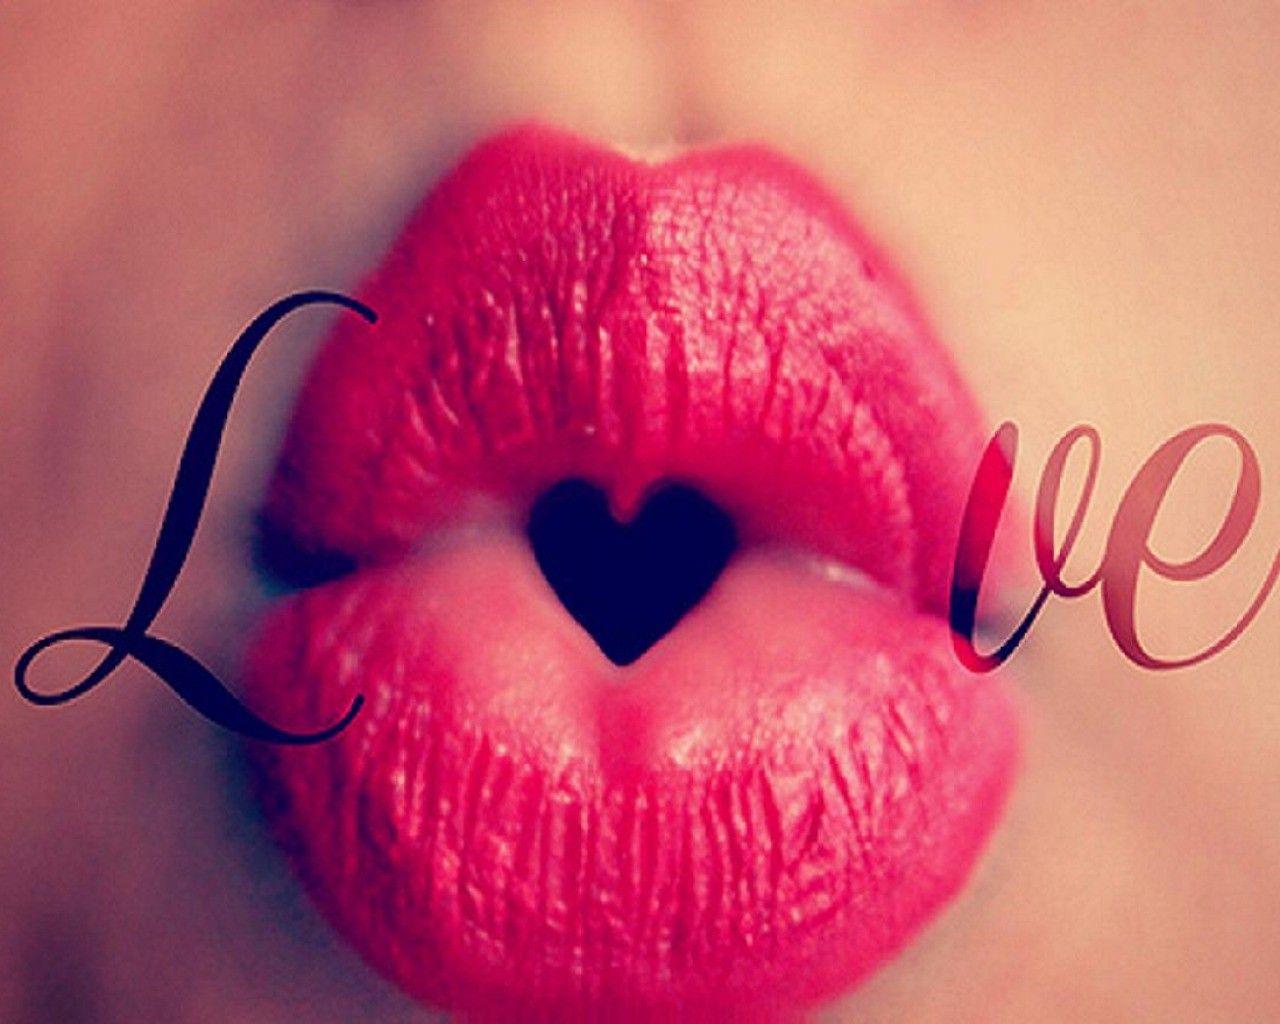 Wallpapers Kissing Lips